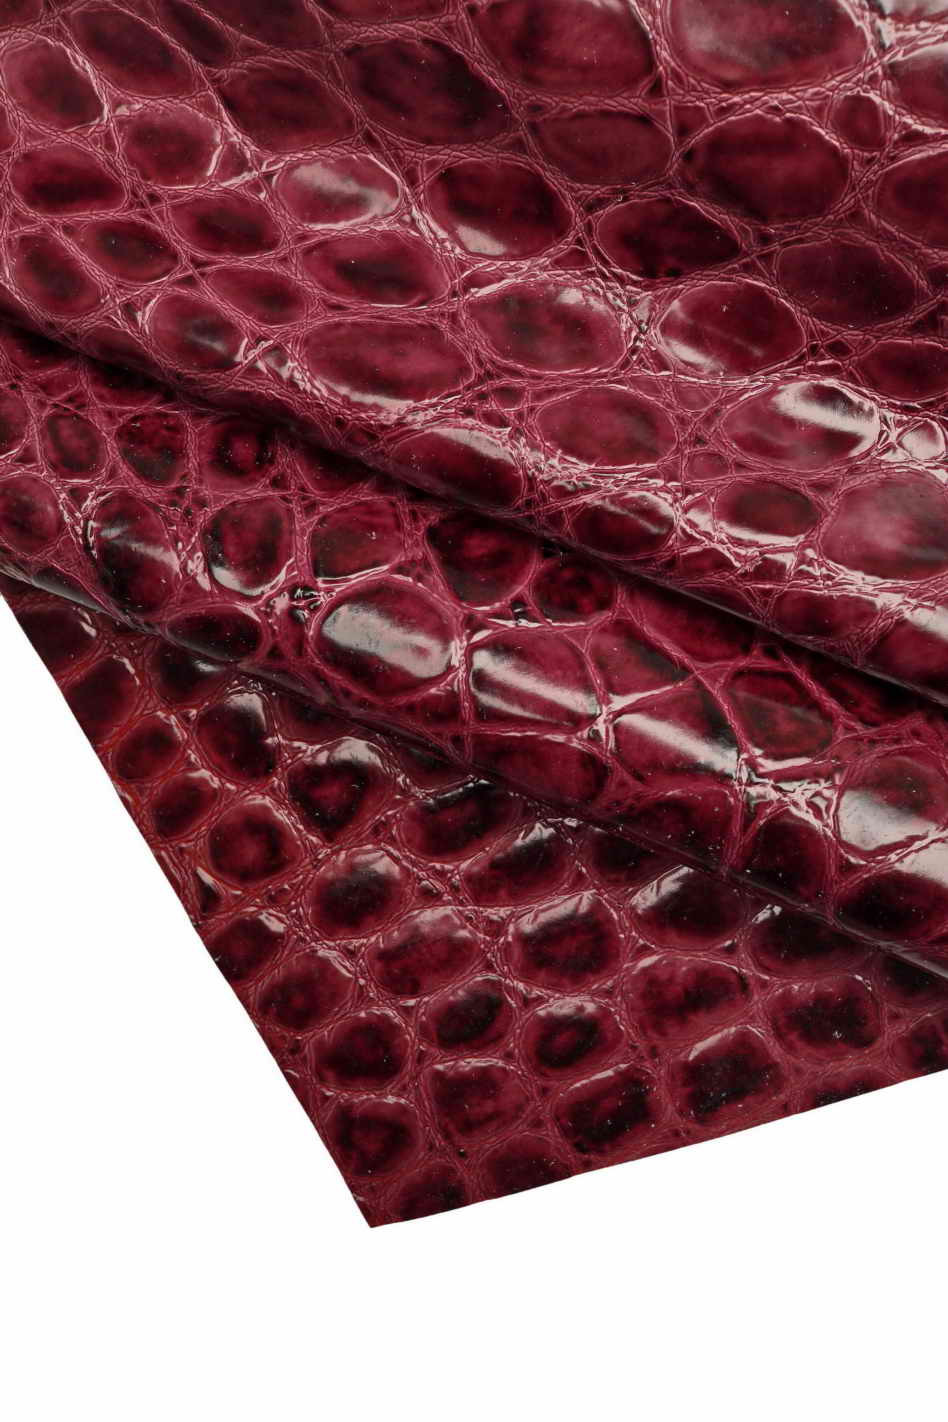 Dark crocodile skin texture in red color. Red reptile leather imitation  texture to background. Stock Photo